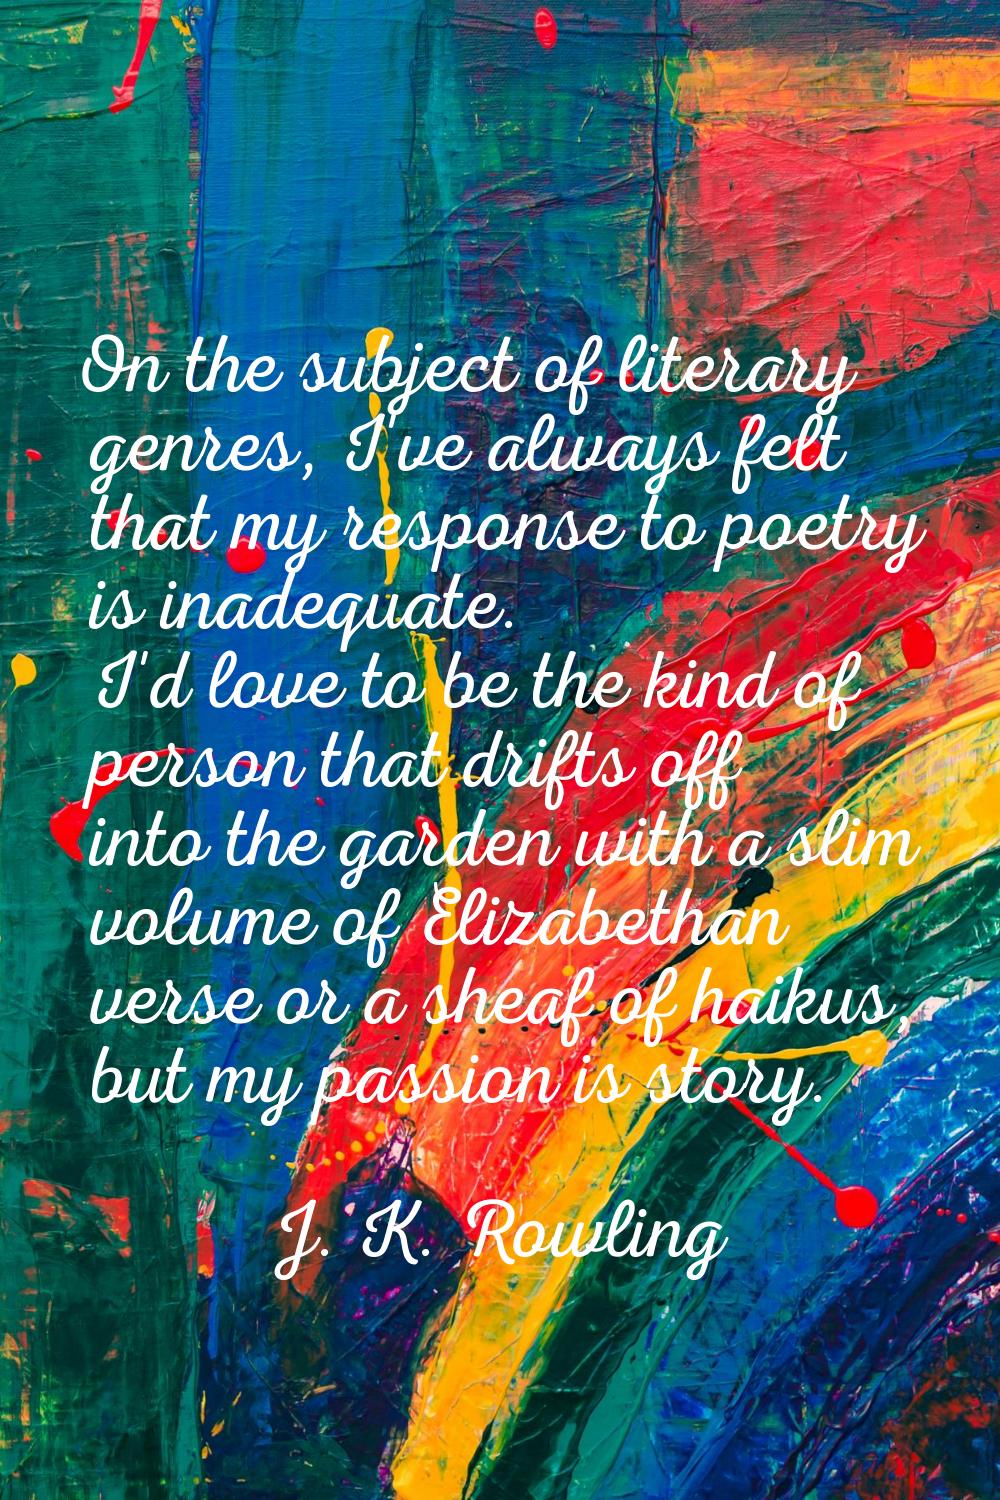 On the subject of literary genres, I've always felt that my response to poetry is inadequate. I'd l